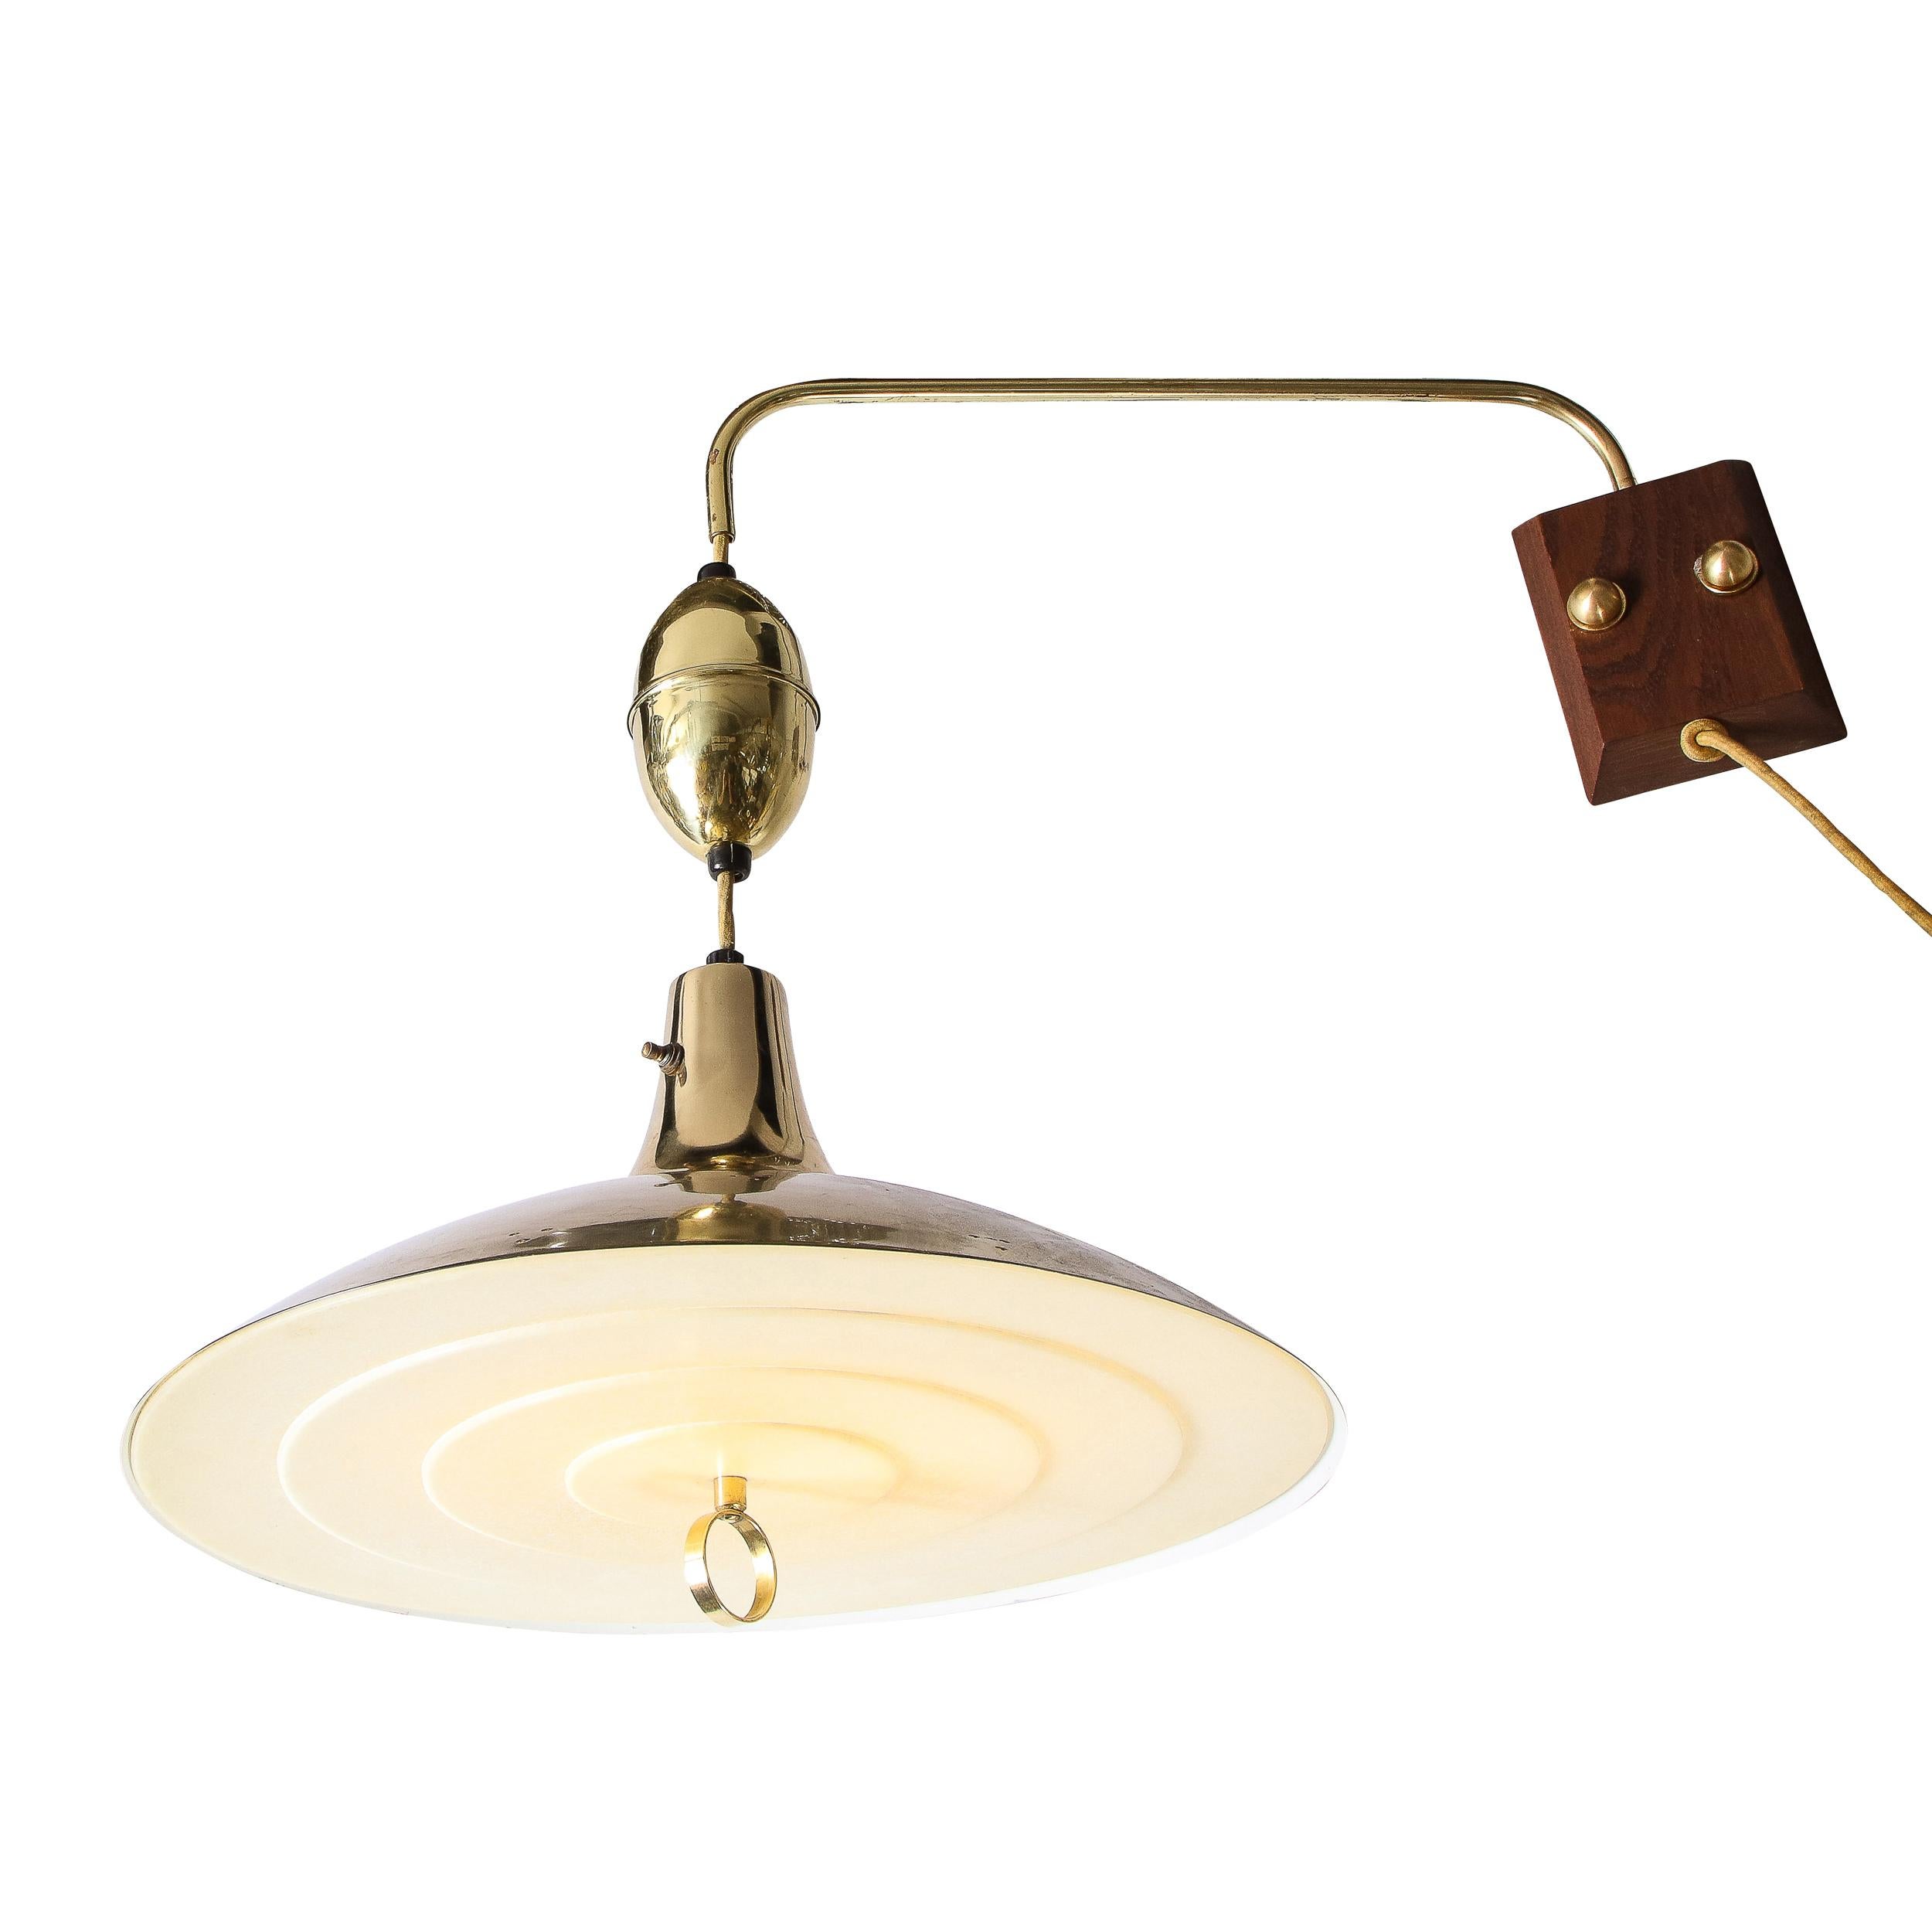 This stunning Mid Century Modern wall light , circa 1960 , features a sculptural polished brass concave body pierced with sets of three perforations (arranged in a pyramidal configuration with a tiered perspex shade concealing the shades fitted with